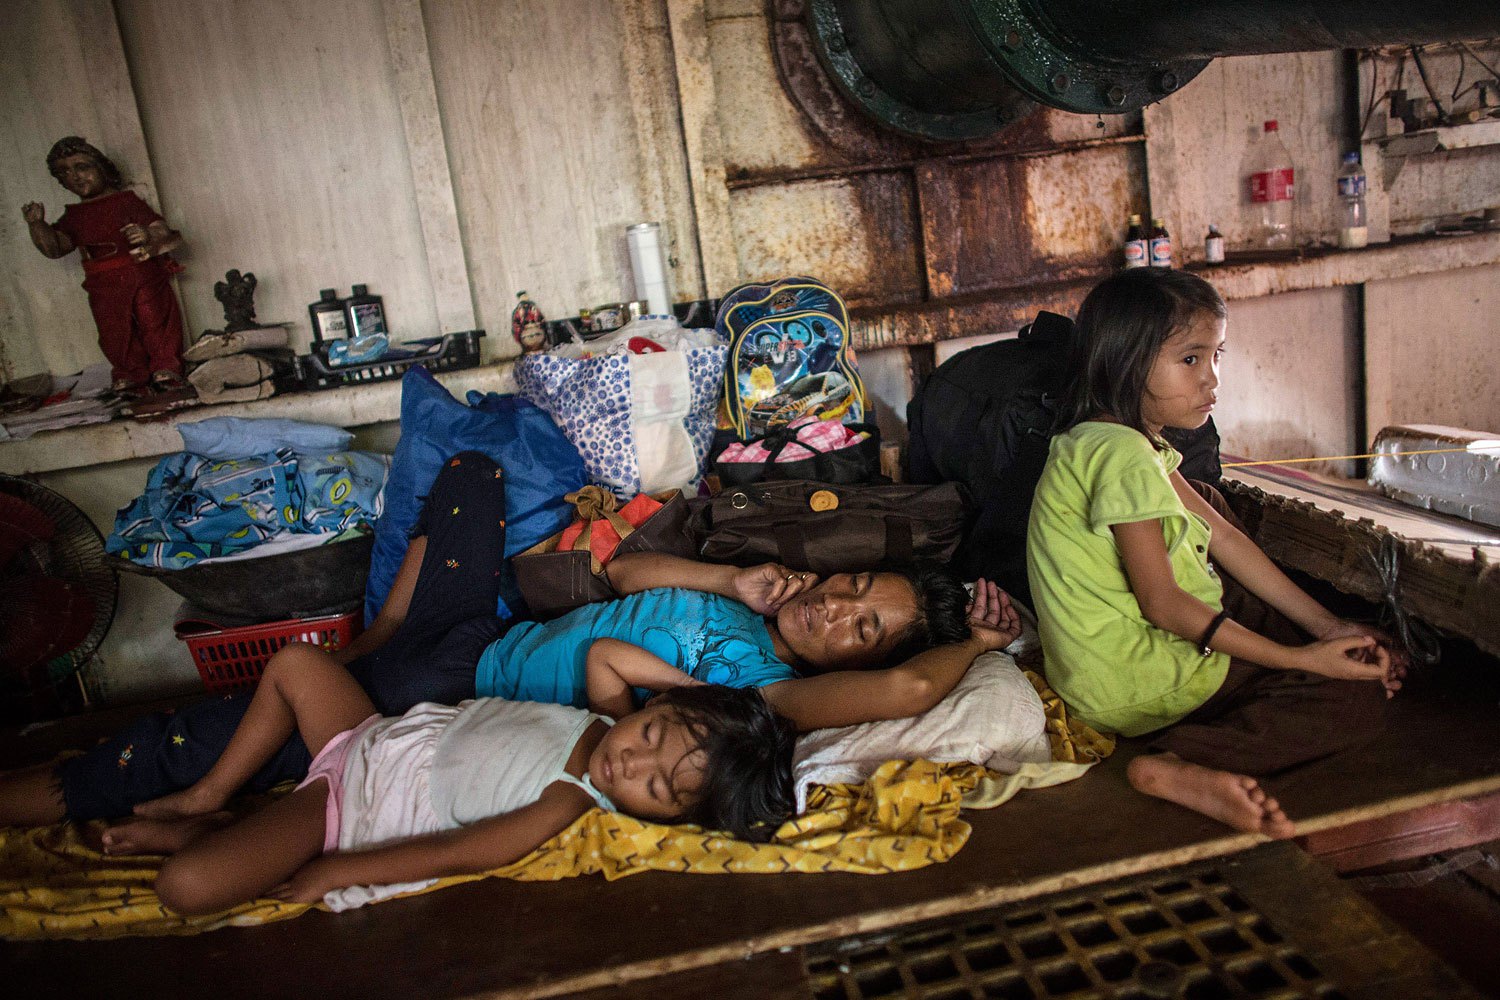 A family sleeps in the hull of a tanker in a particularly badly damaged part of Tacloban on November 19, 2013 in Leyte, Philippines.